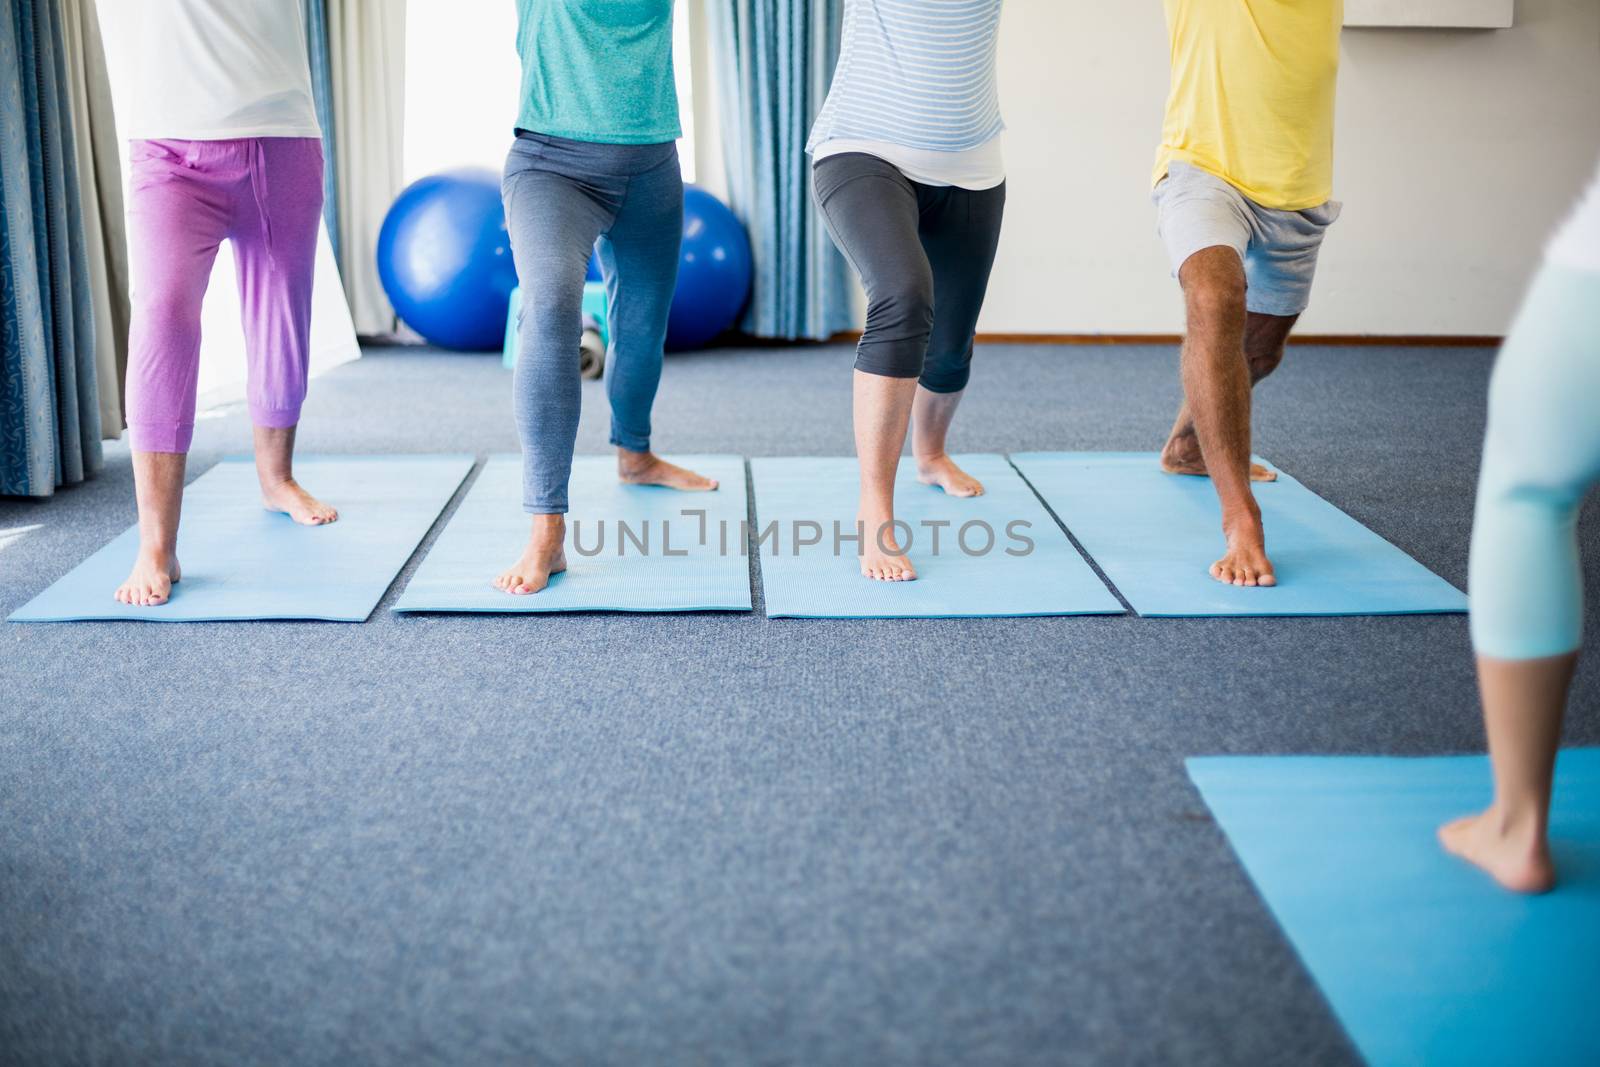 Instructor performing yoga with seniors by Wavebreakmedia